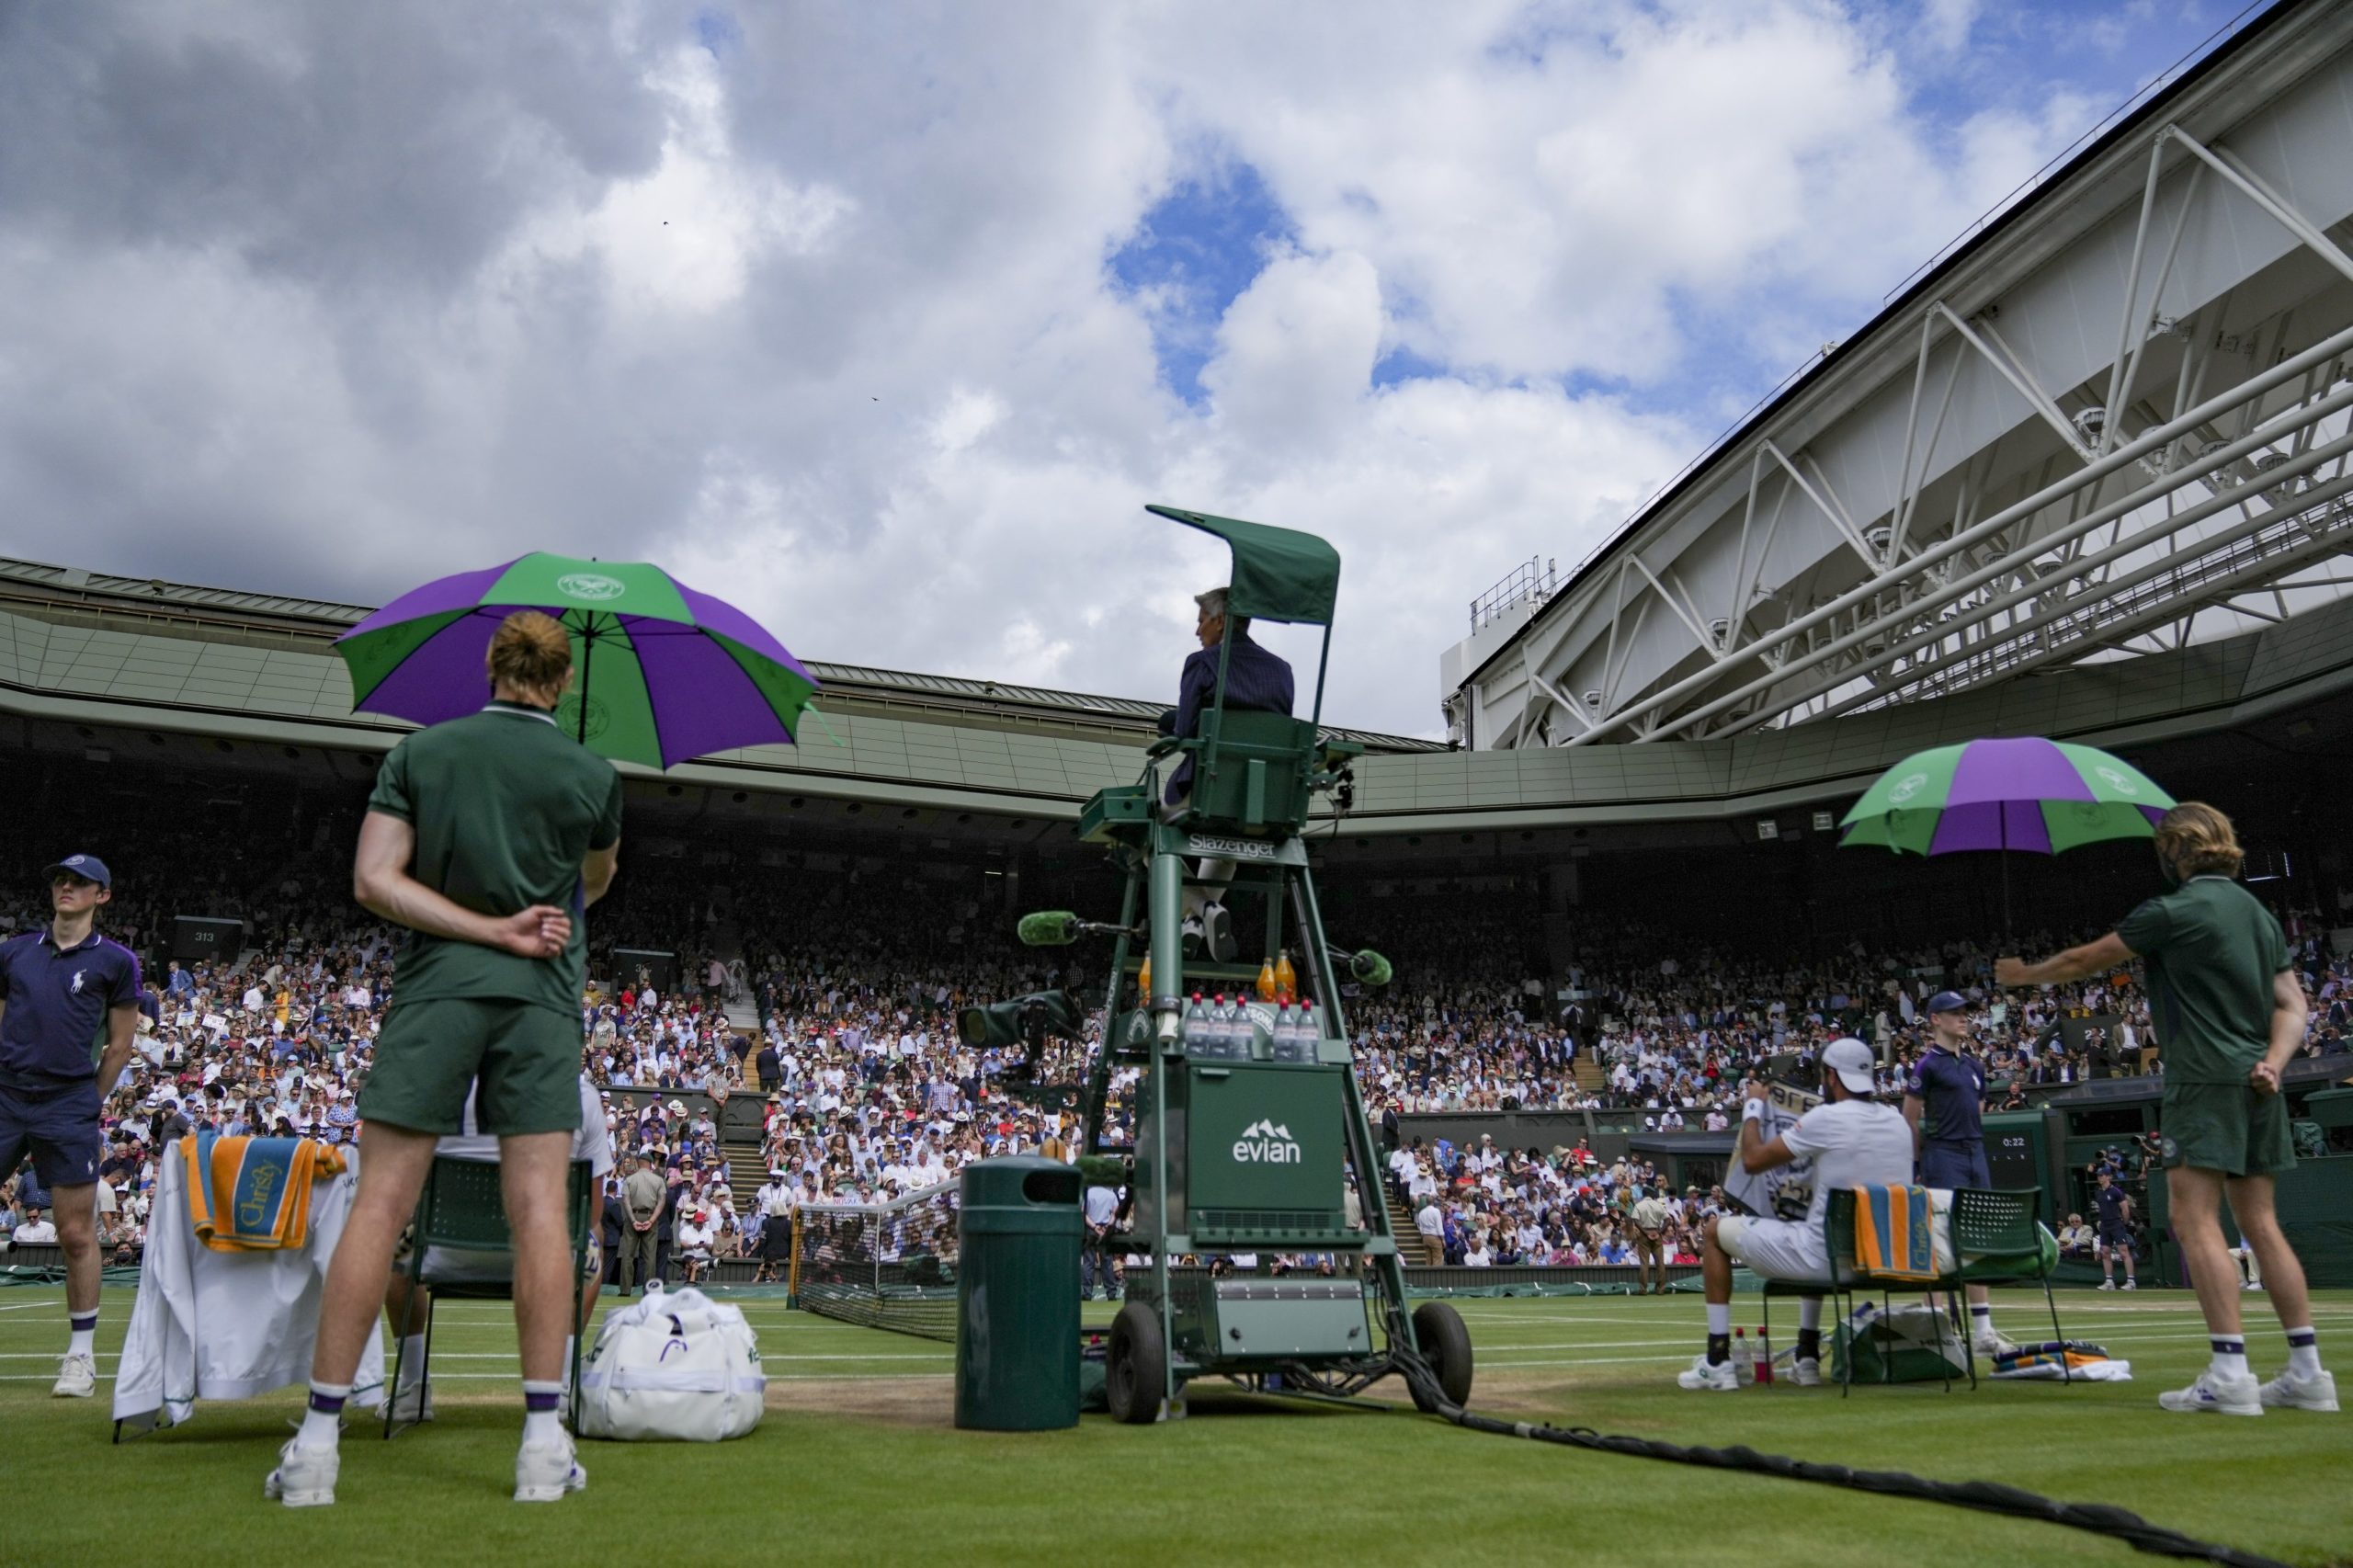 Centre Court wimbledon view of the back of the ball kids and the chair umpire during the final match